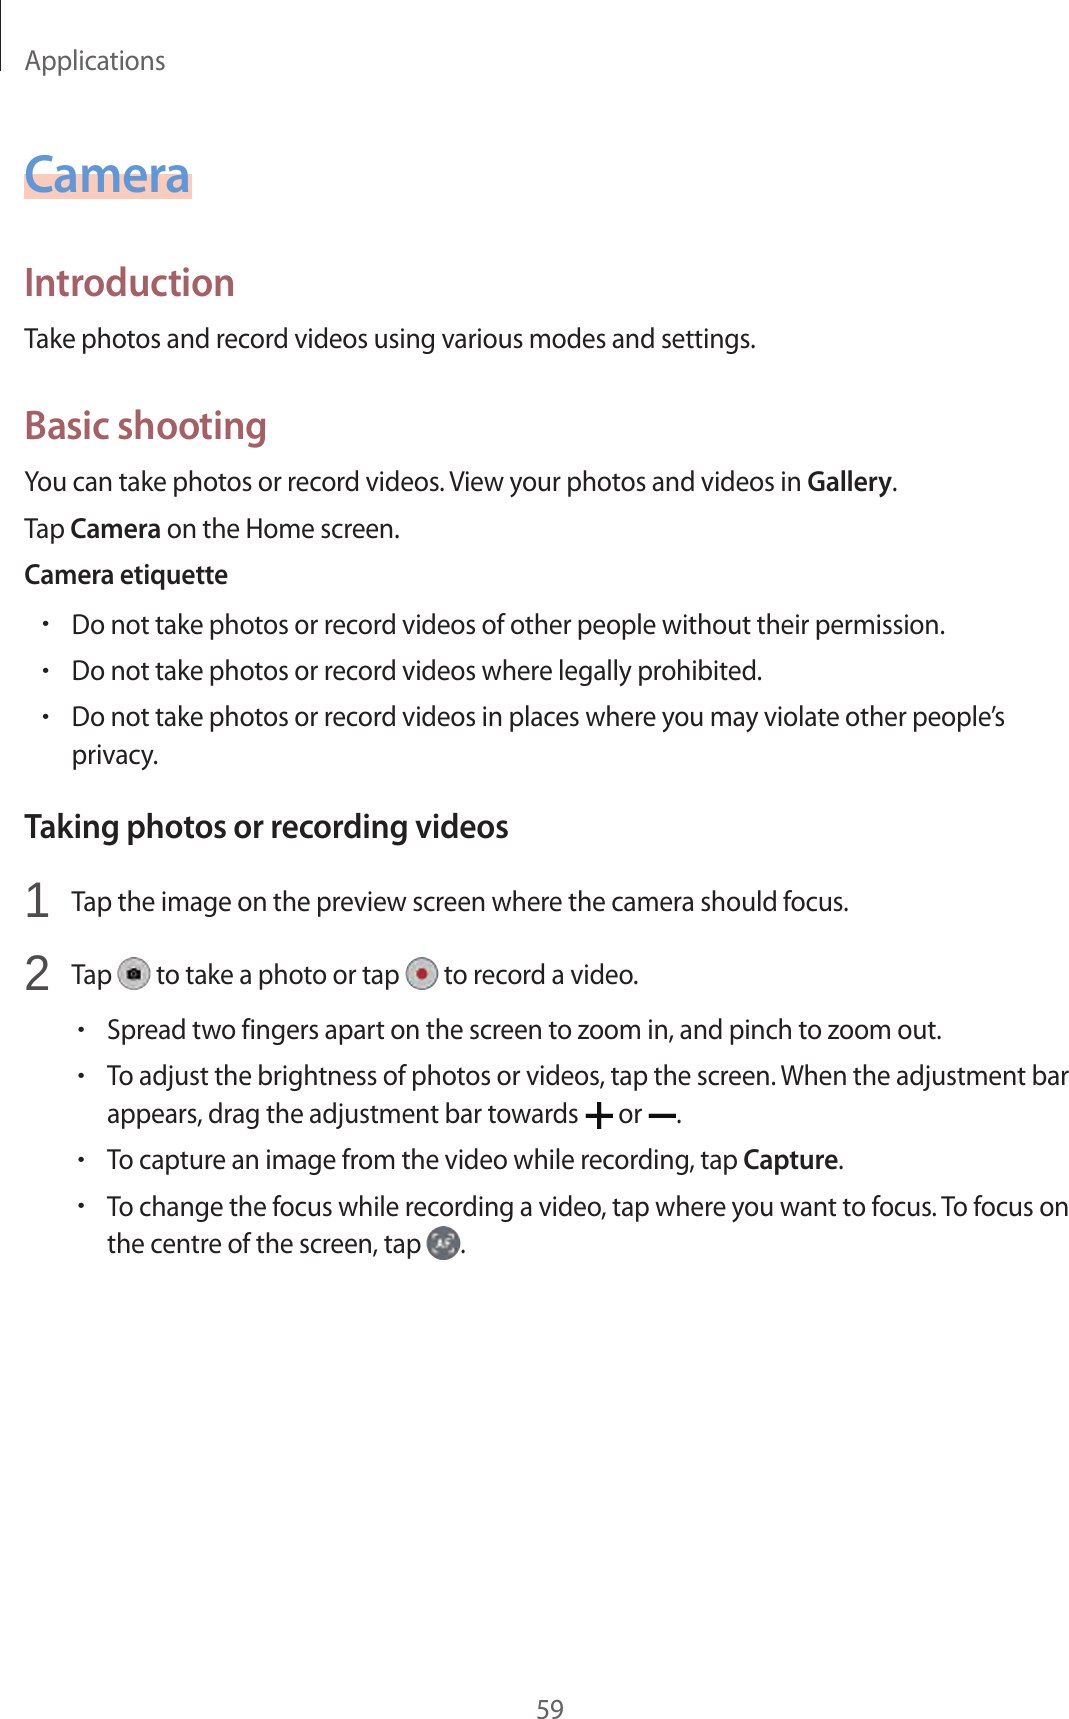 Applications59CameraIntroductionTake photos and record videos using various modes and settings.Basic shootingYou can take photos or record videos. View your photos and videos in Gallery.Tap Camera on the Home screen.Camera etiquette•Do not take photos or record videos of other people without their permission.•Do not take photos or record videos where legally prohibited.•Do not take photos or record videos in places where you may violate other people’s privacy.Taking photos or recording videos1  Tap the image on the preview screen where the camera should focus.2  Tap   to take a photo or tap   to record a video.•Spread two fingers apart on the screen to zoom in, and pinch to zoom out.•To adjust the brightness of photos or videos, tap the screen. When the adjustment bar appears, drag the adjustment bar towards   or  .•To capture an image from the video while recording, tap Capture.•To change the focus while recording a video, tap where you want to focus. To focus on the centre of the screen, tap  .